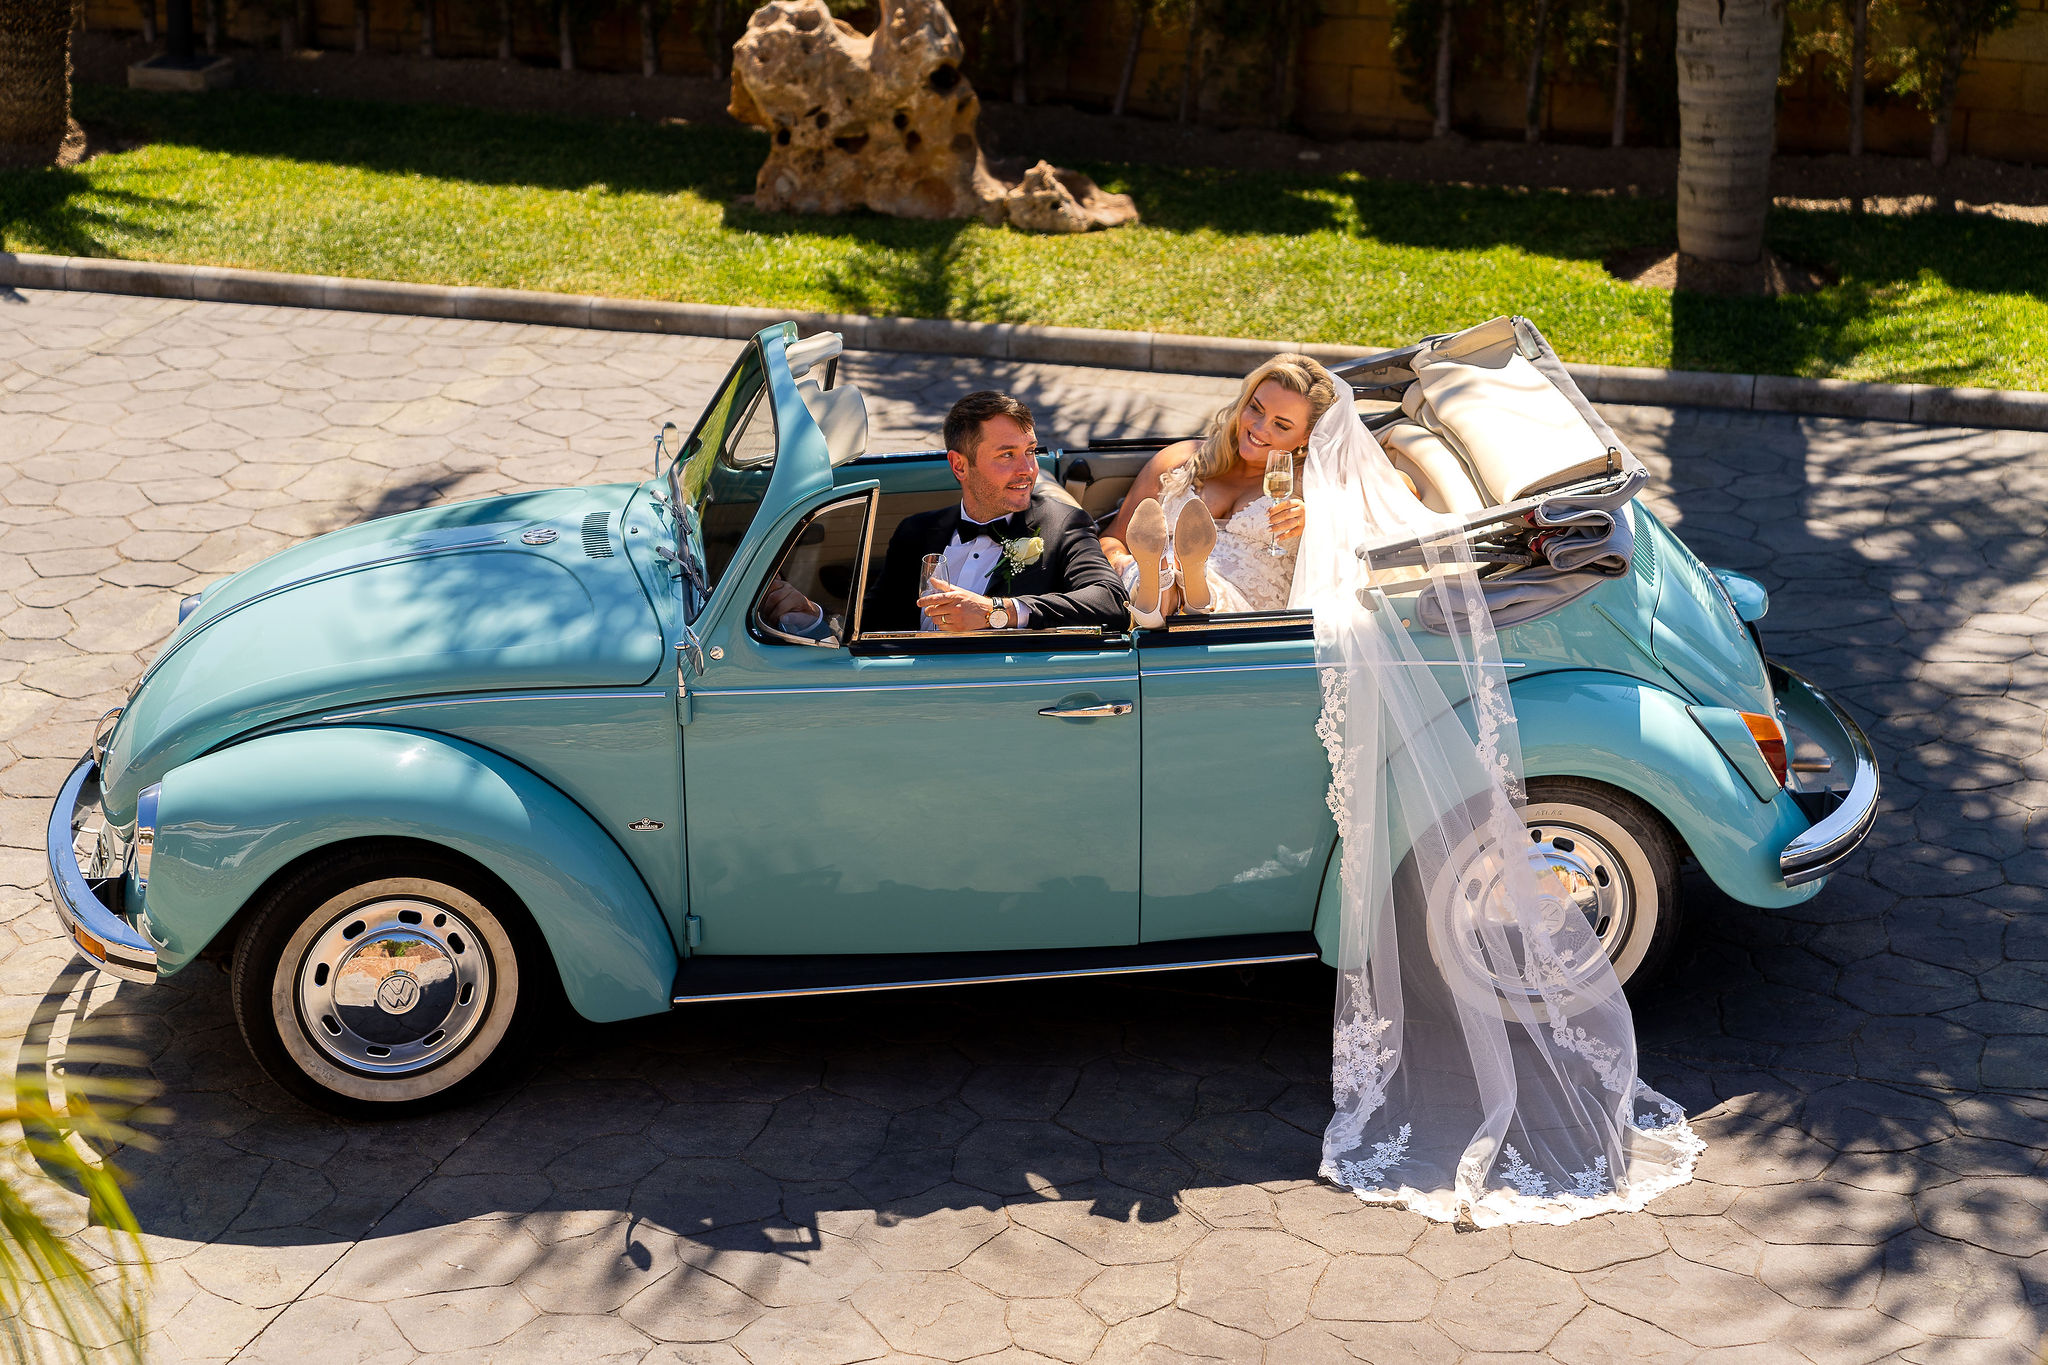 The bride, wearing a white wedding dress and veil, is seen sipping champagne sitting in the back seat of a classic Volkswagen Beetle. The groom, attired in black tie is also celebrating drinking champagne in the front seat. One lucky couple will win a wedding competition.